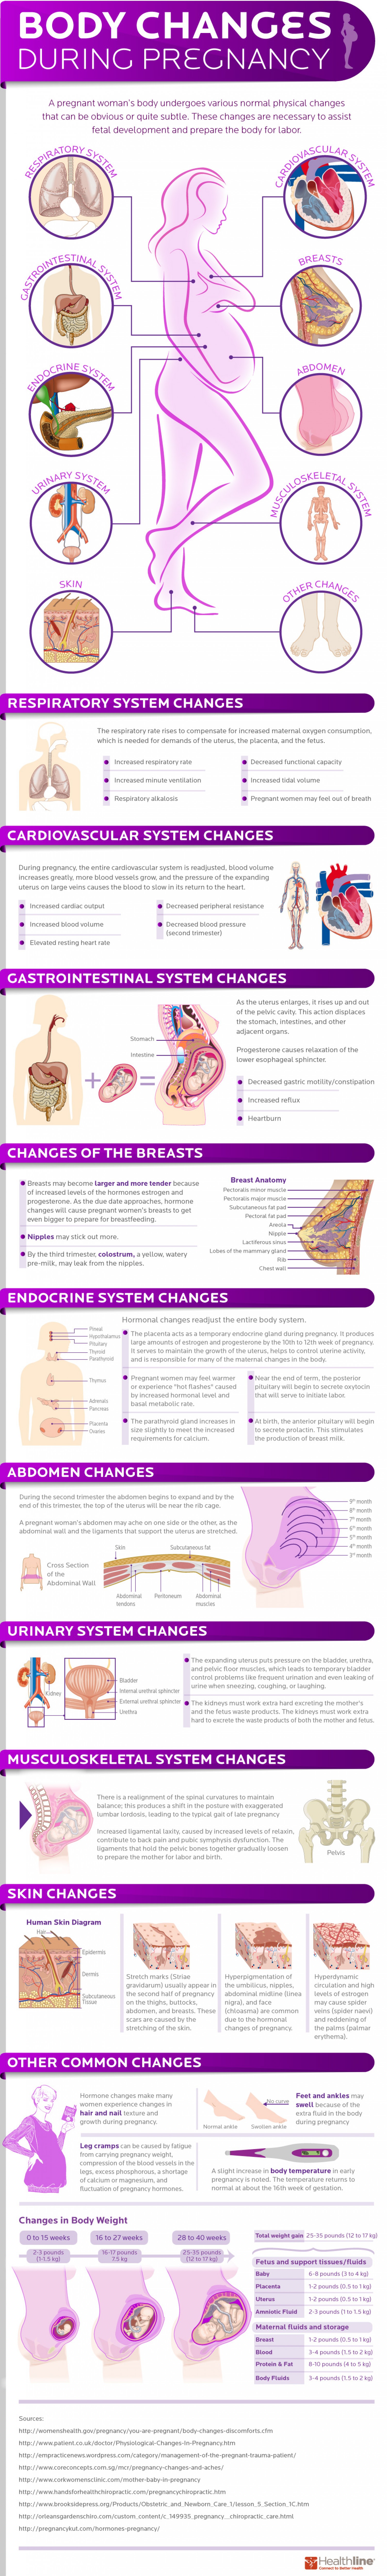 Changes that a womans’ body goes through when she is pregnant infographic